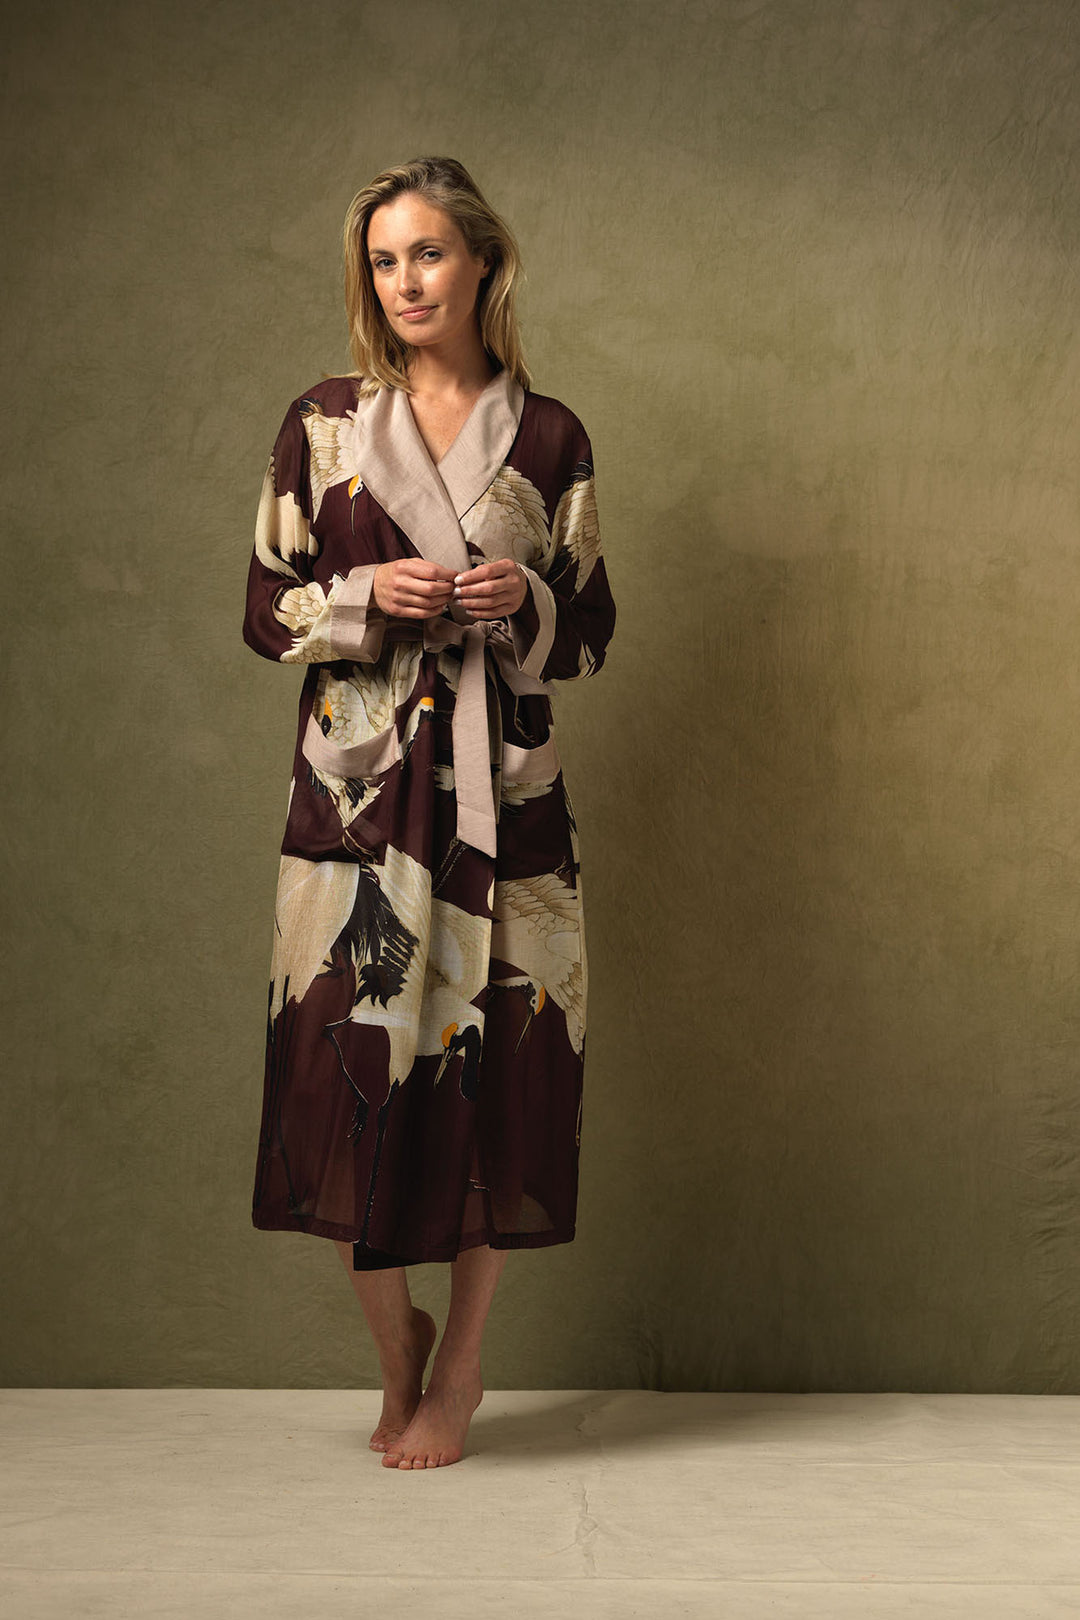 ladies long length dressing gown  burgundy background with stork bird print by One Hundred Stars